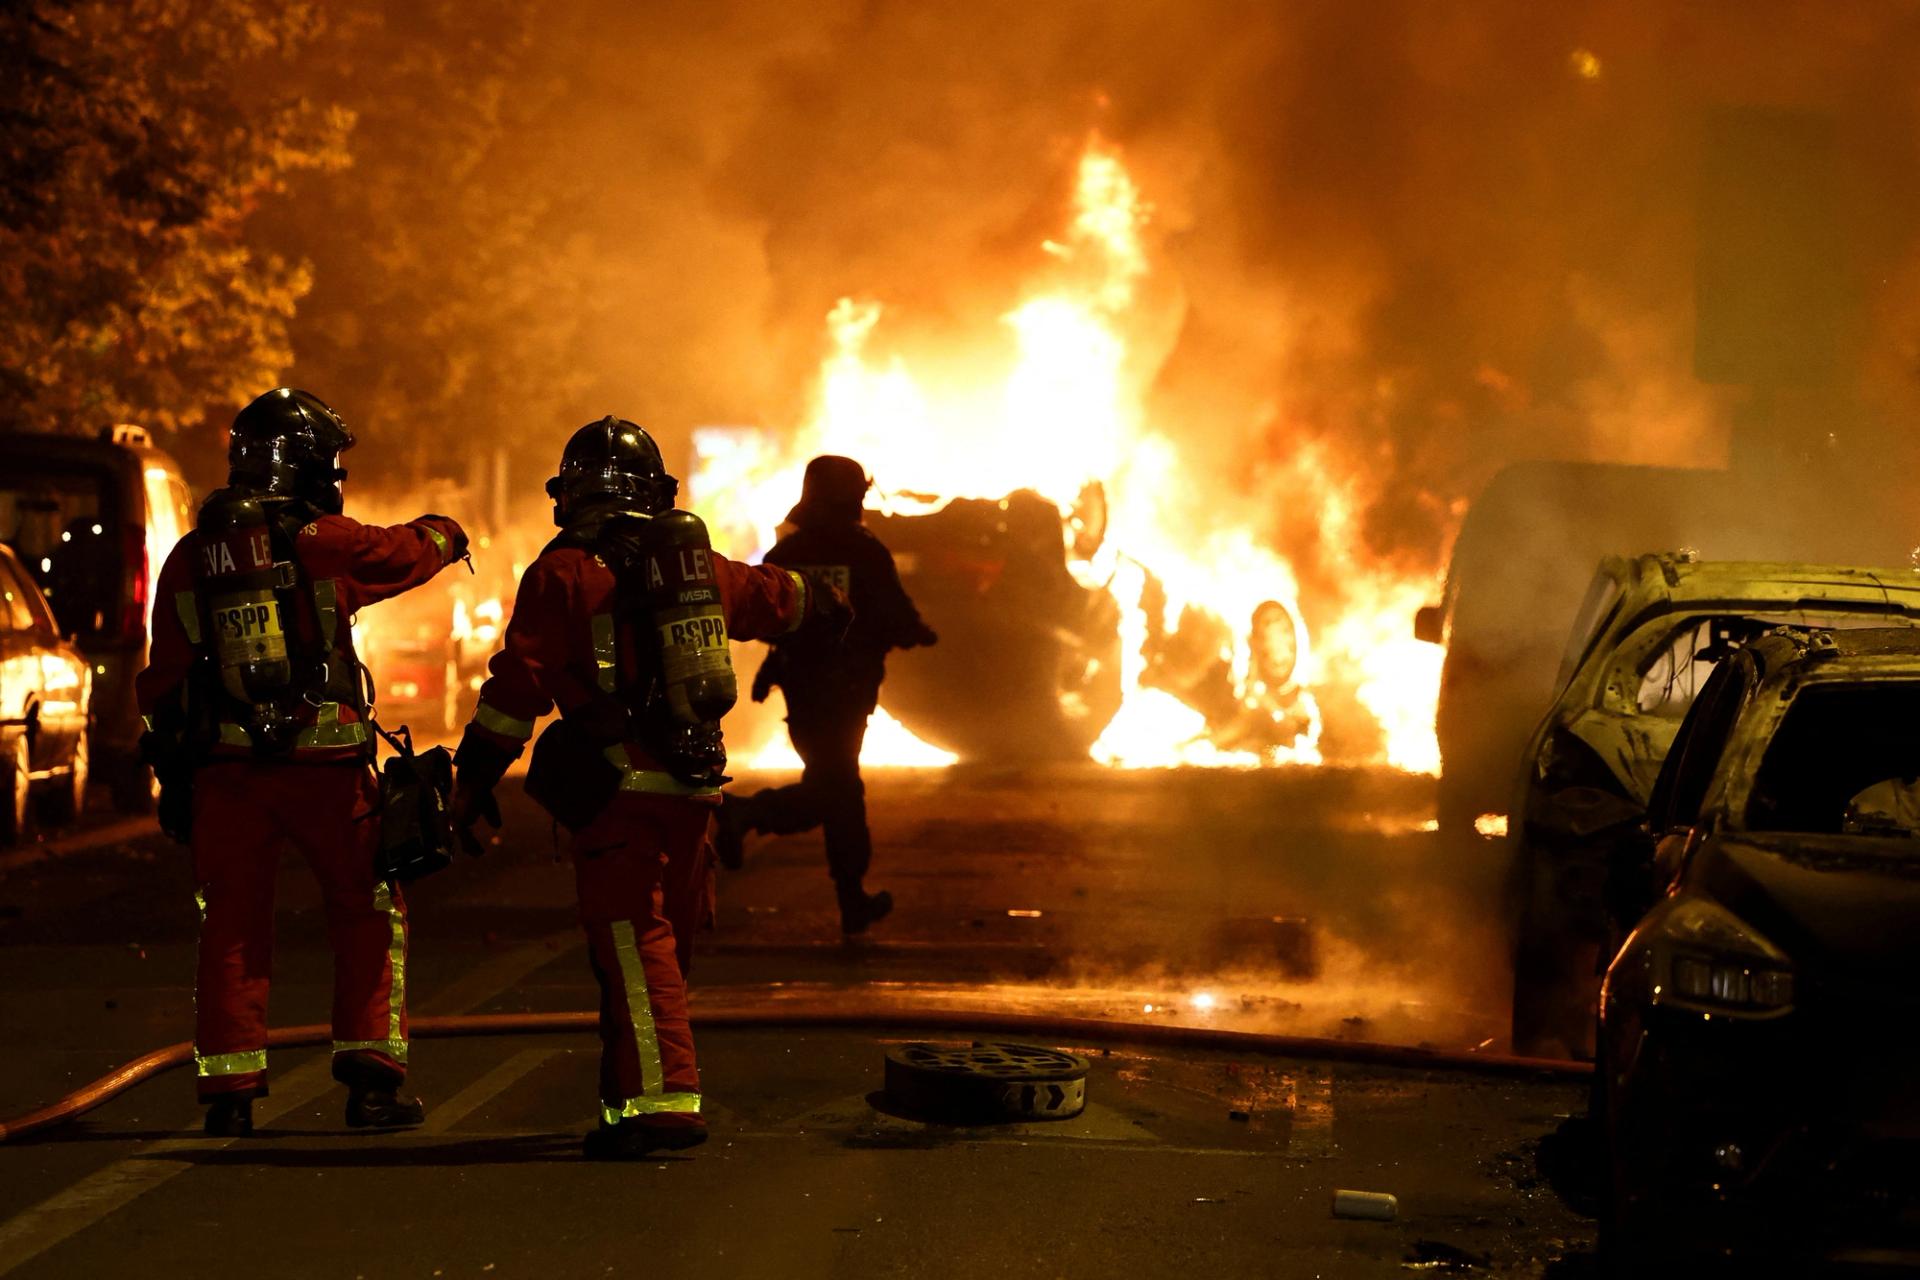 Firefighters and french police operate during clashes between protesters and police, after the death of Nahel, a 17-year-old teenager killed by a French police officer during a traffic stop, in Nanterre, Paris suburb, France, June 28, 2023. REUTERS/Stephanie Lecocq